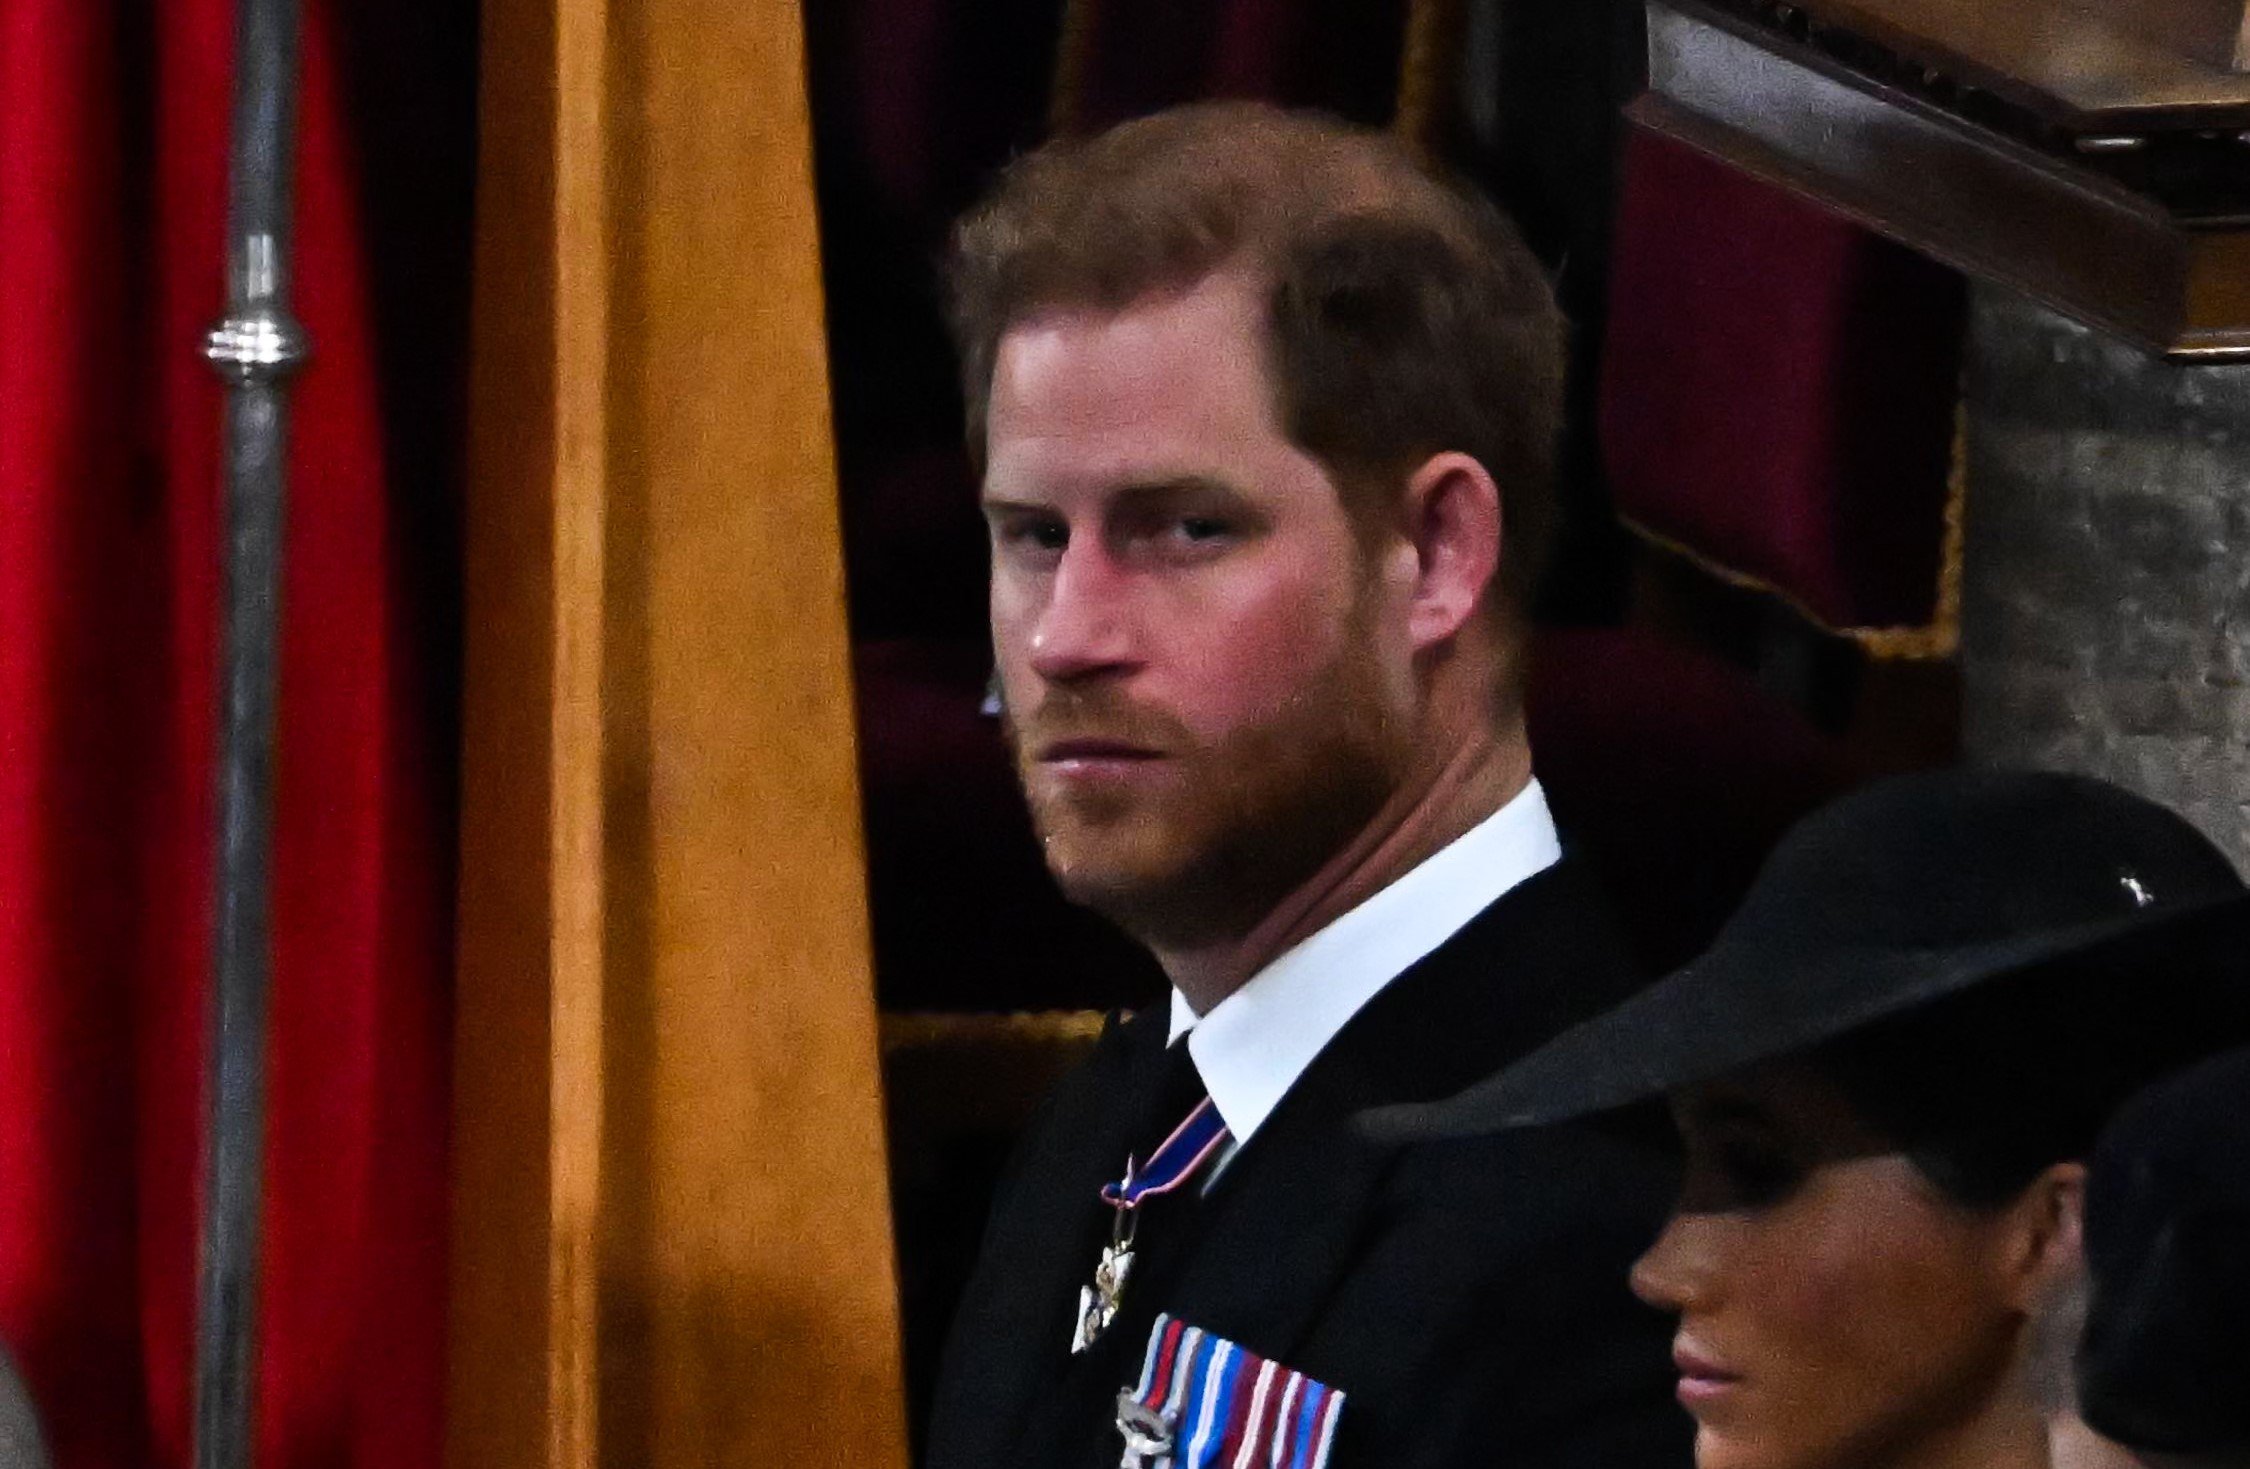 Prince Harry, who an expert says showed a lot of anger during Queen Elizabeth II's funeral, pictured during the service